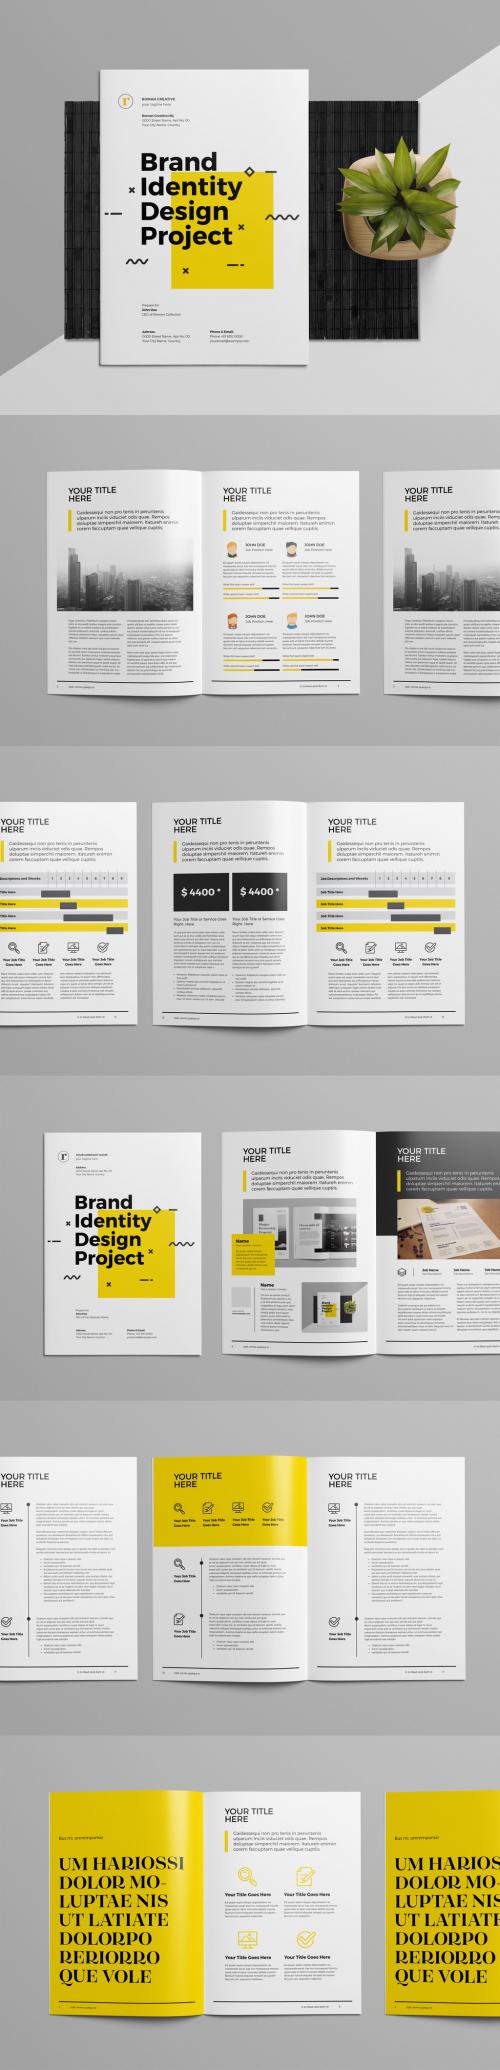 Brand Identity and Proposal Layout with Yellow Accents - 223606446